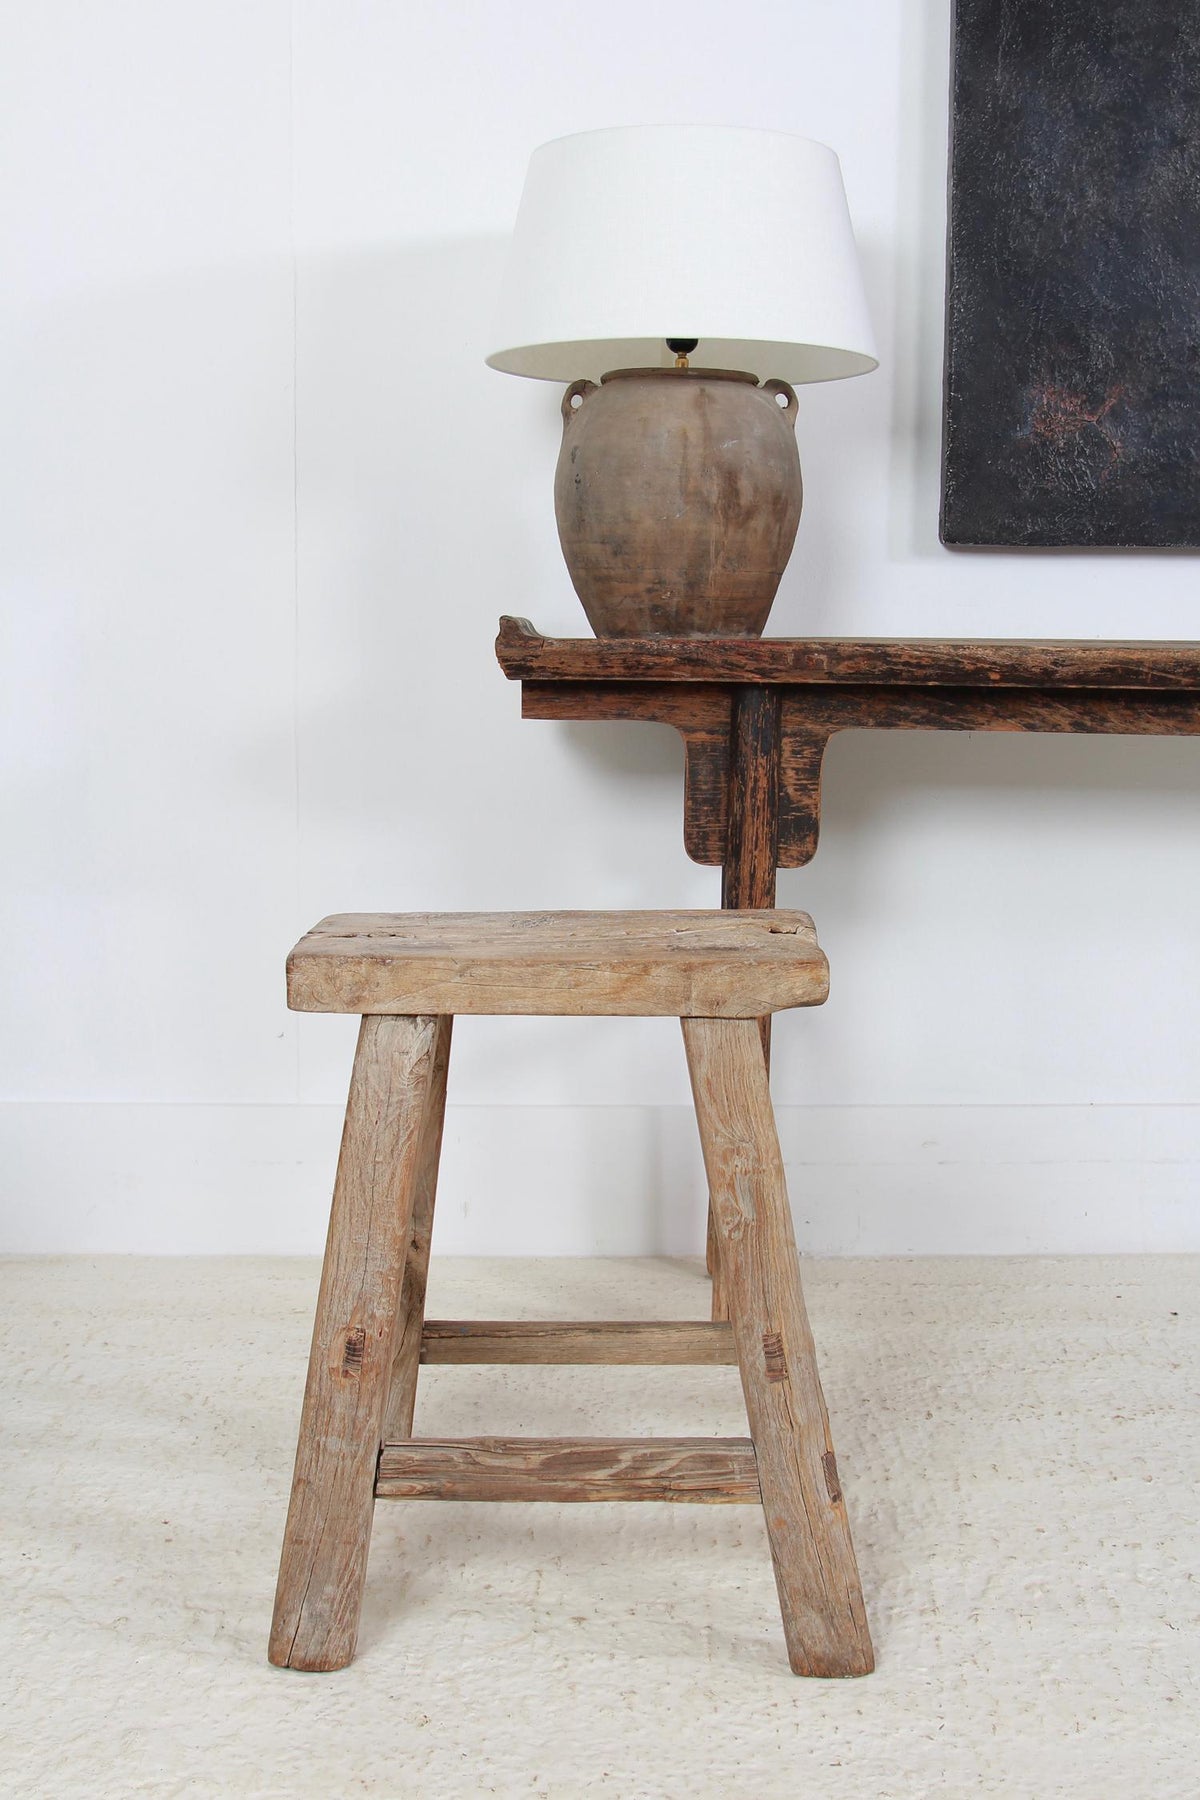 RUSTIC & GNARLY WEATHERED ELM WORKERS STOOL